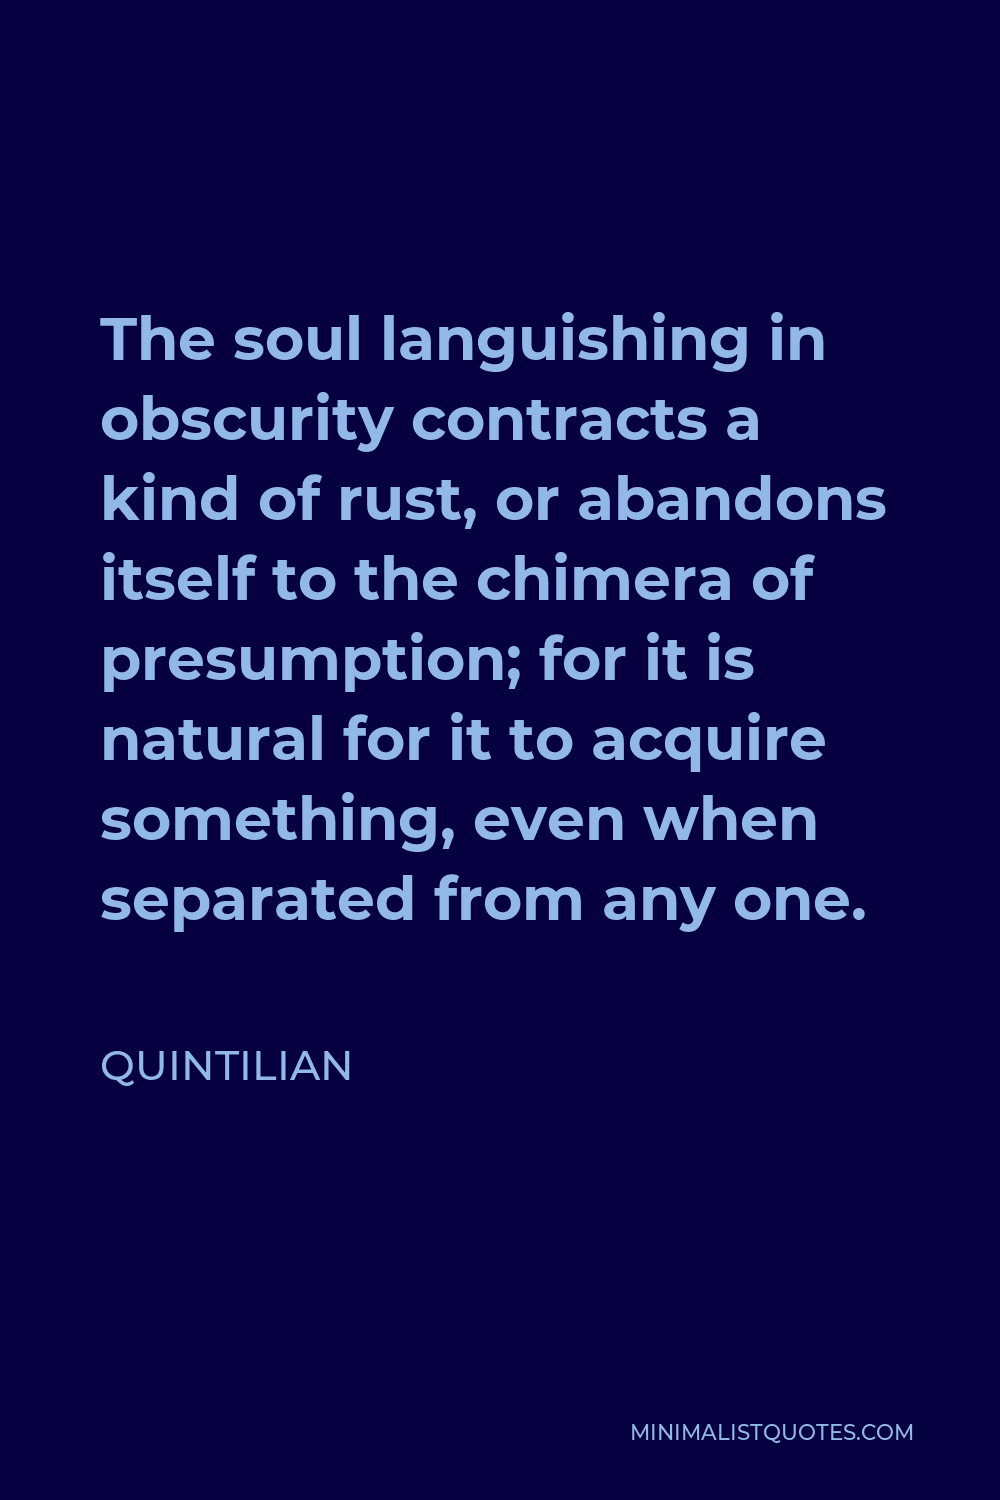 Quintilian Quote - The soul languishing in obscurity contracts a kind of rust, or abandons itself to the chimera of presumption; for it is natural for it to acquire something, even when separated from any one.